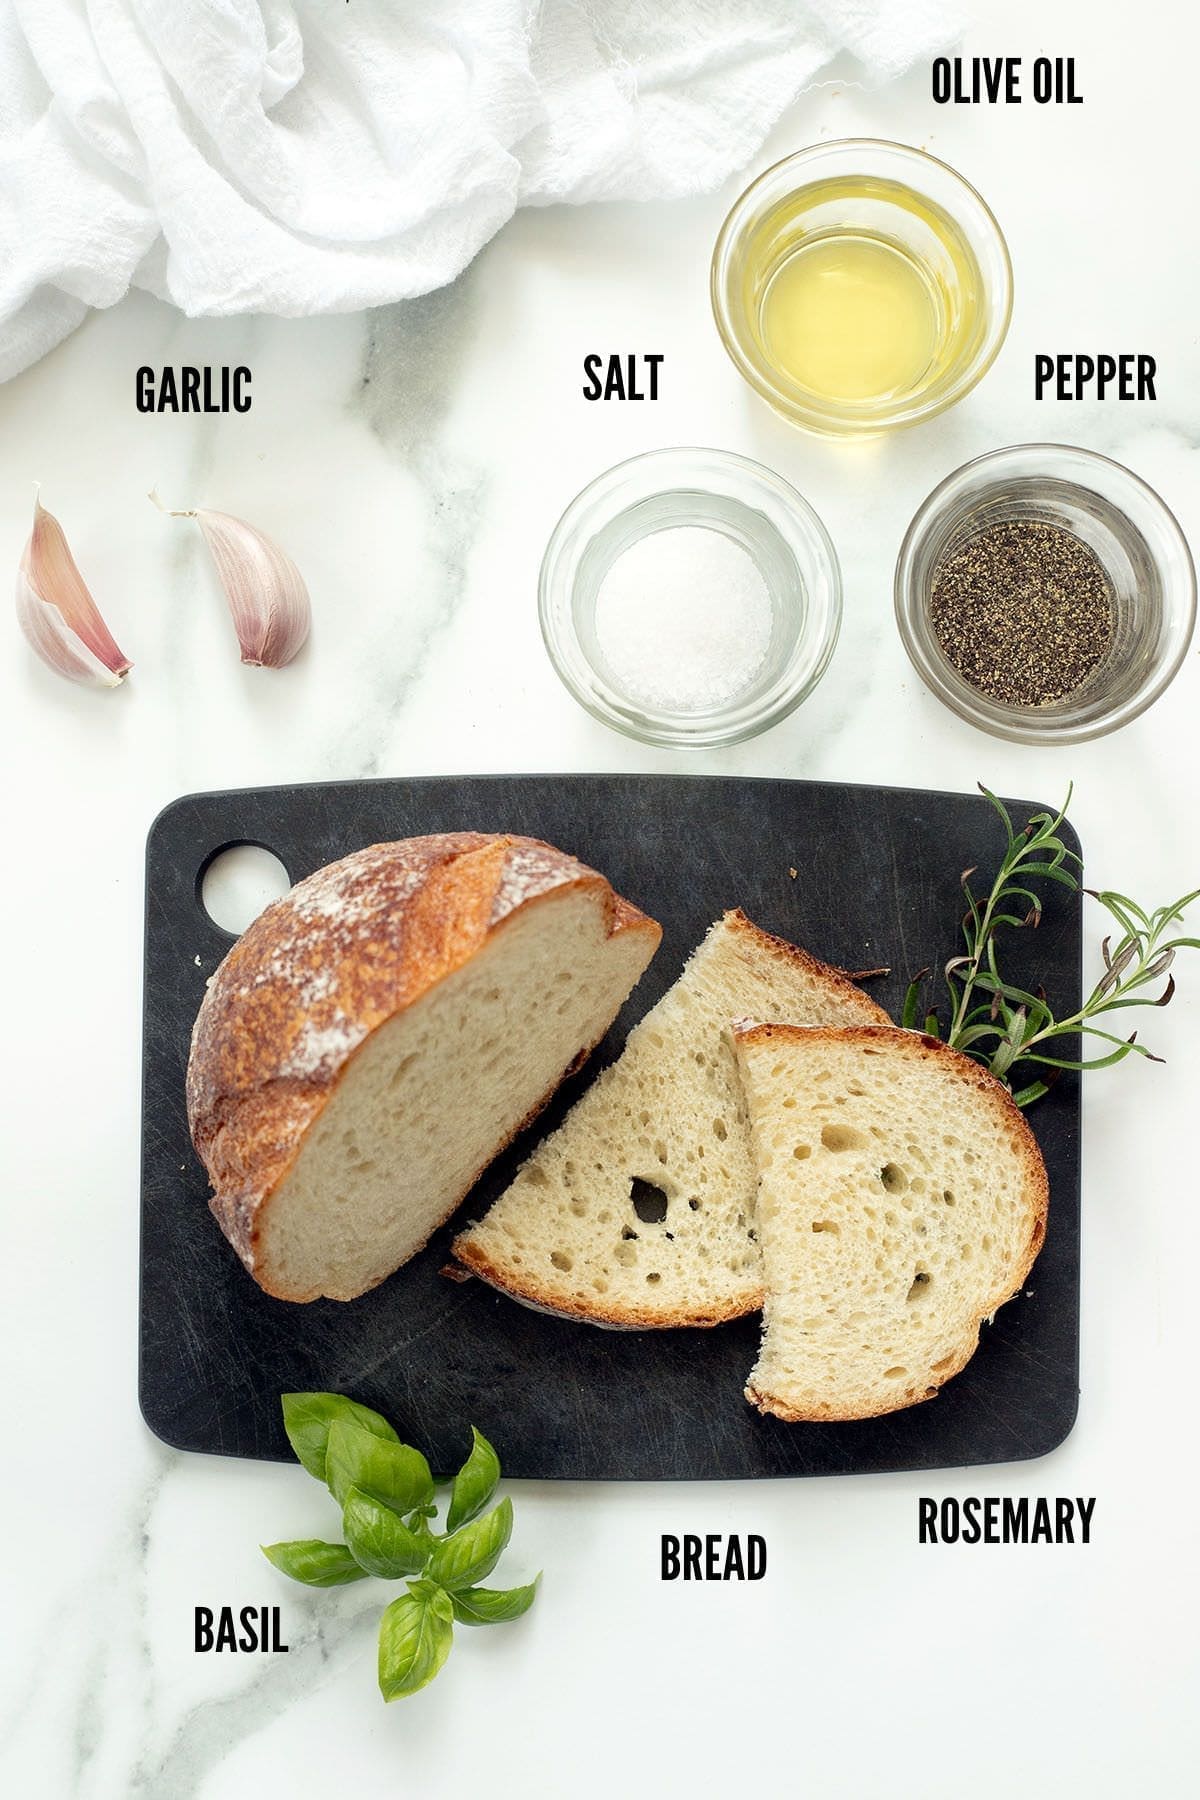 Bread, herbs and seasoning next to a black cutting board.